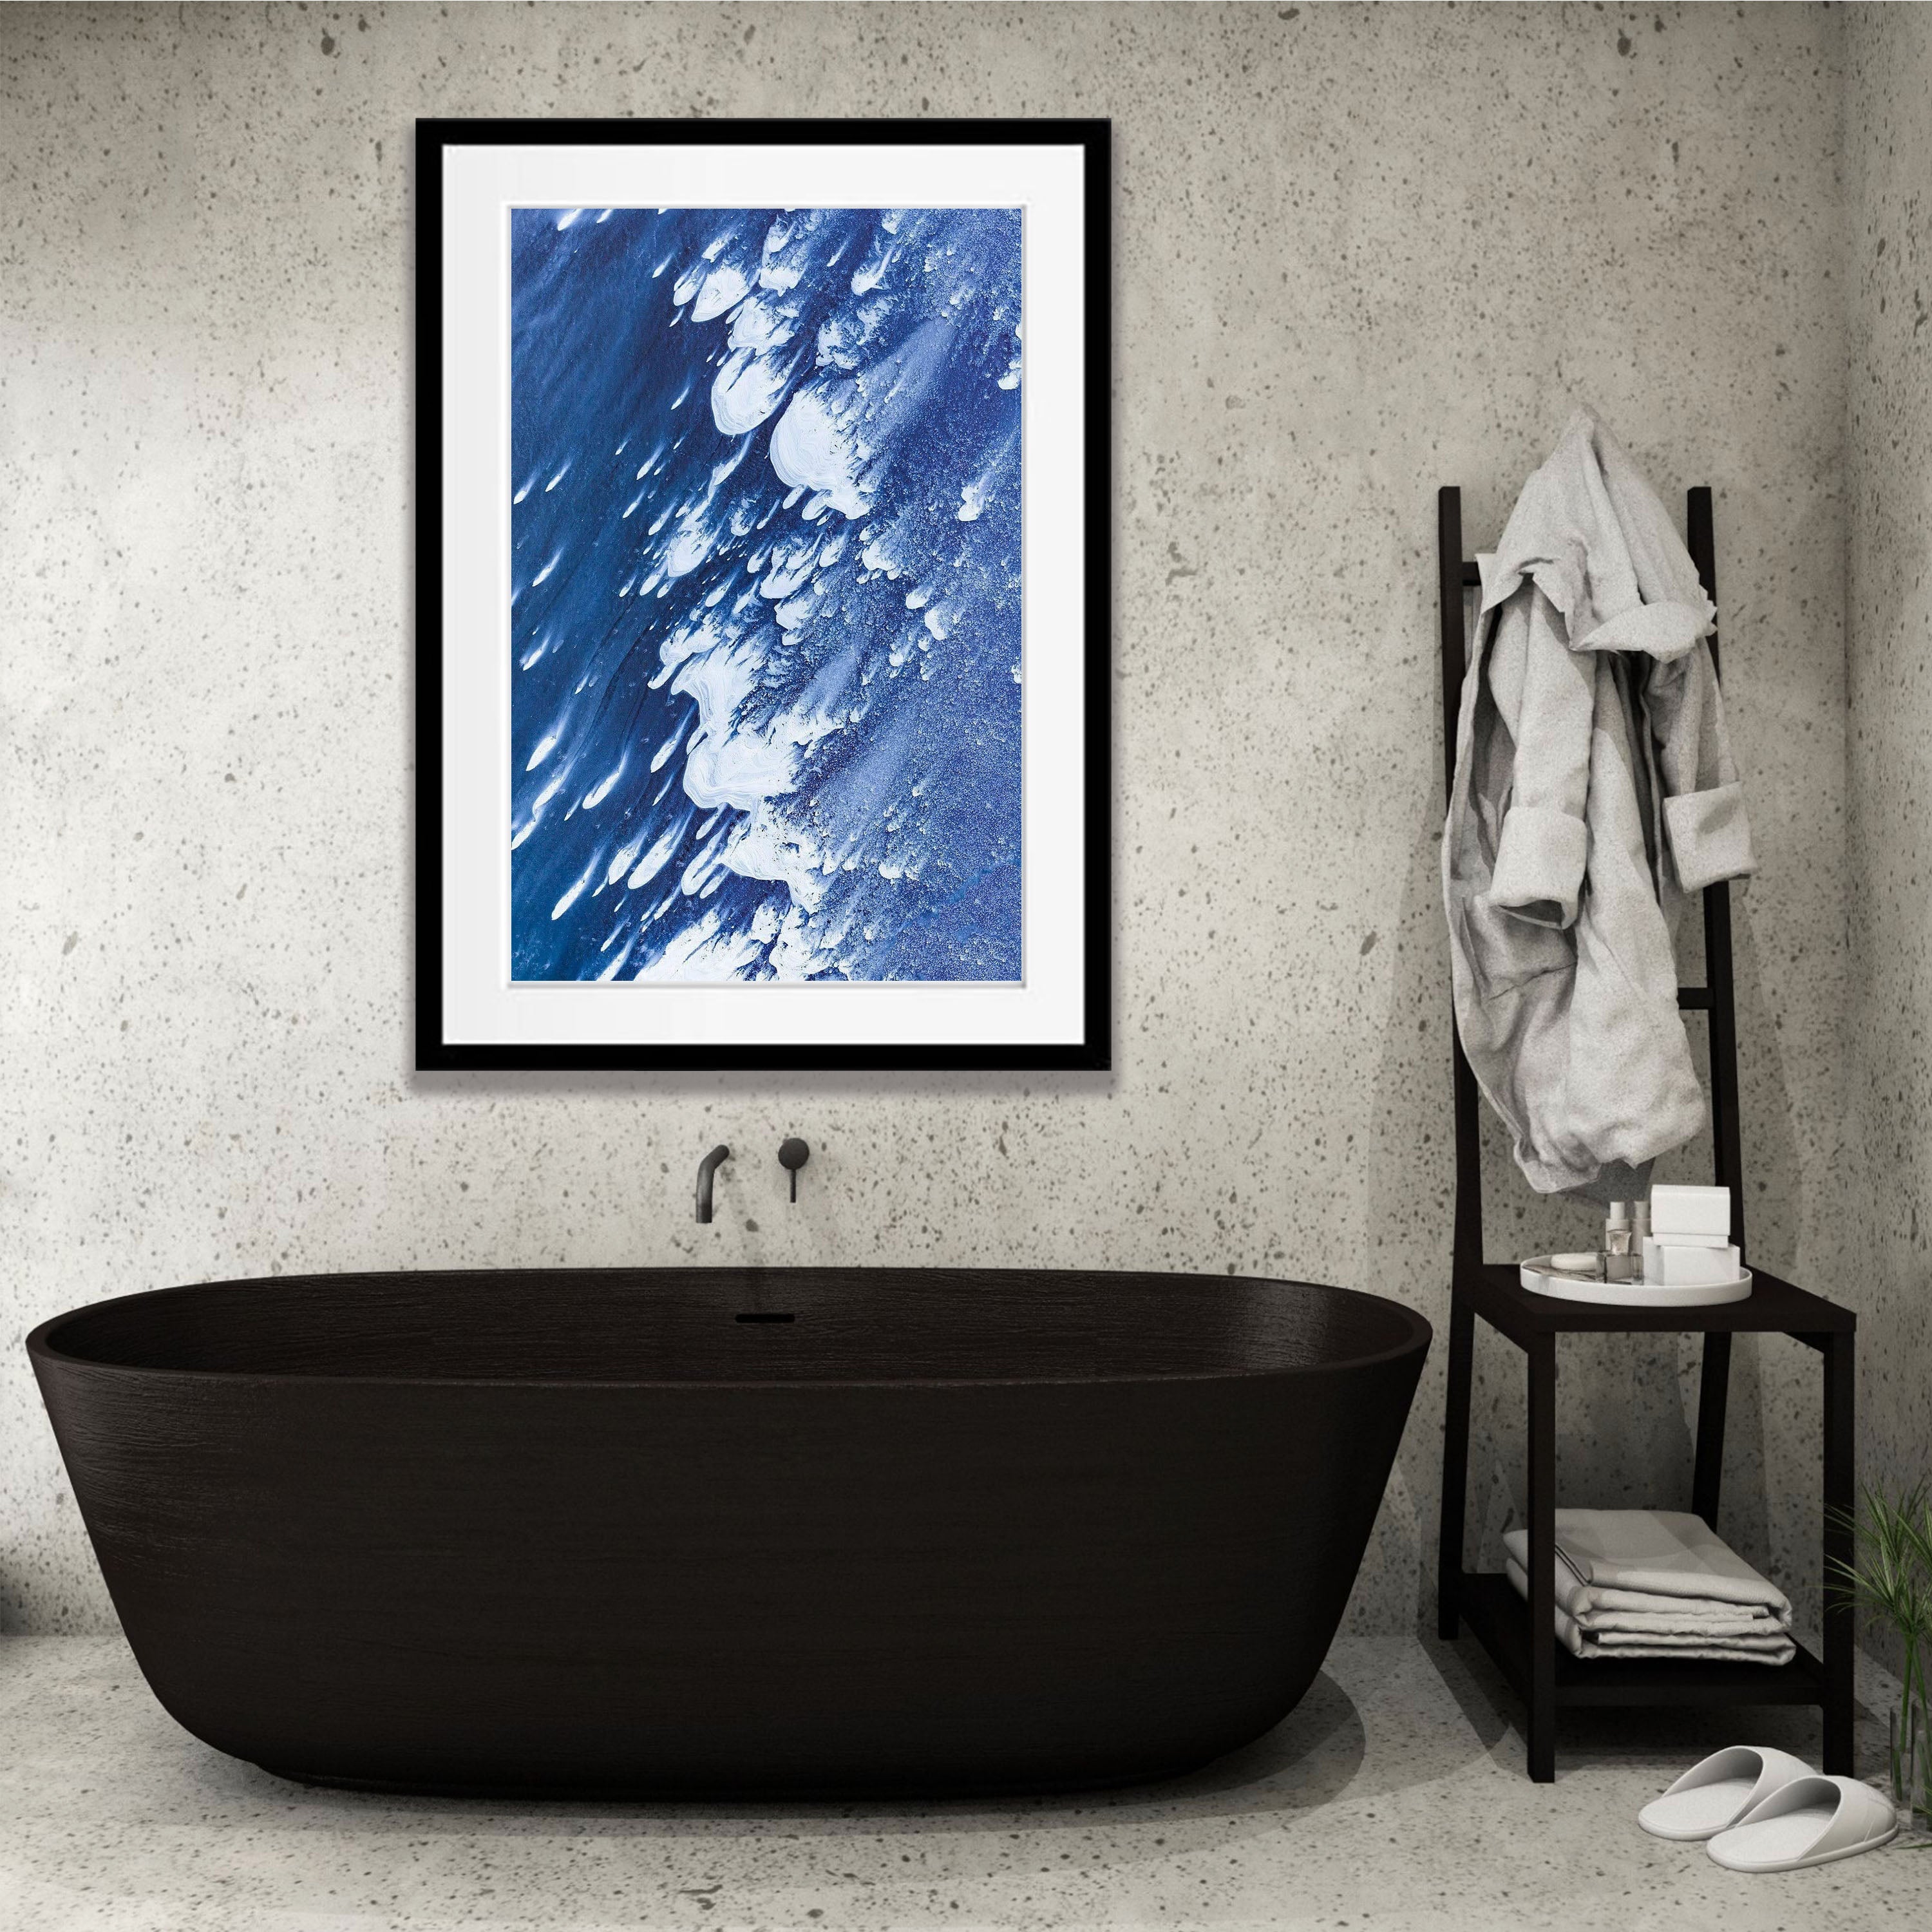 ARTWORK INSTOCK - 'Meteorite Shower' - Available 150 x 120cms Mounted Print (ready to frame) in the gallery TODAY!